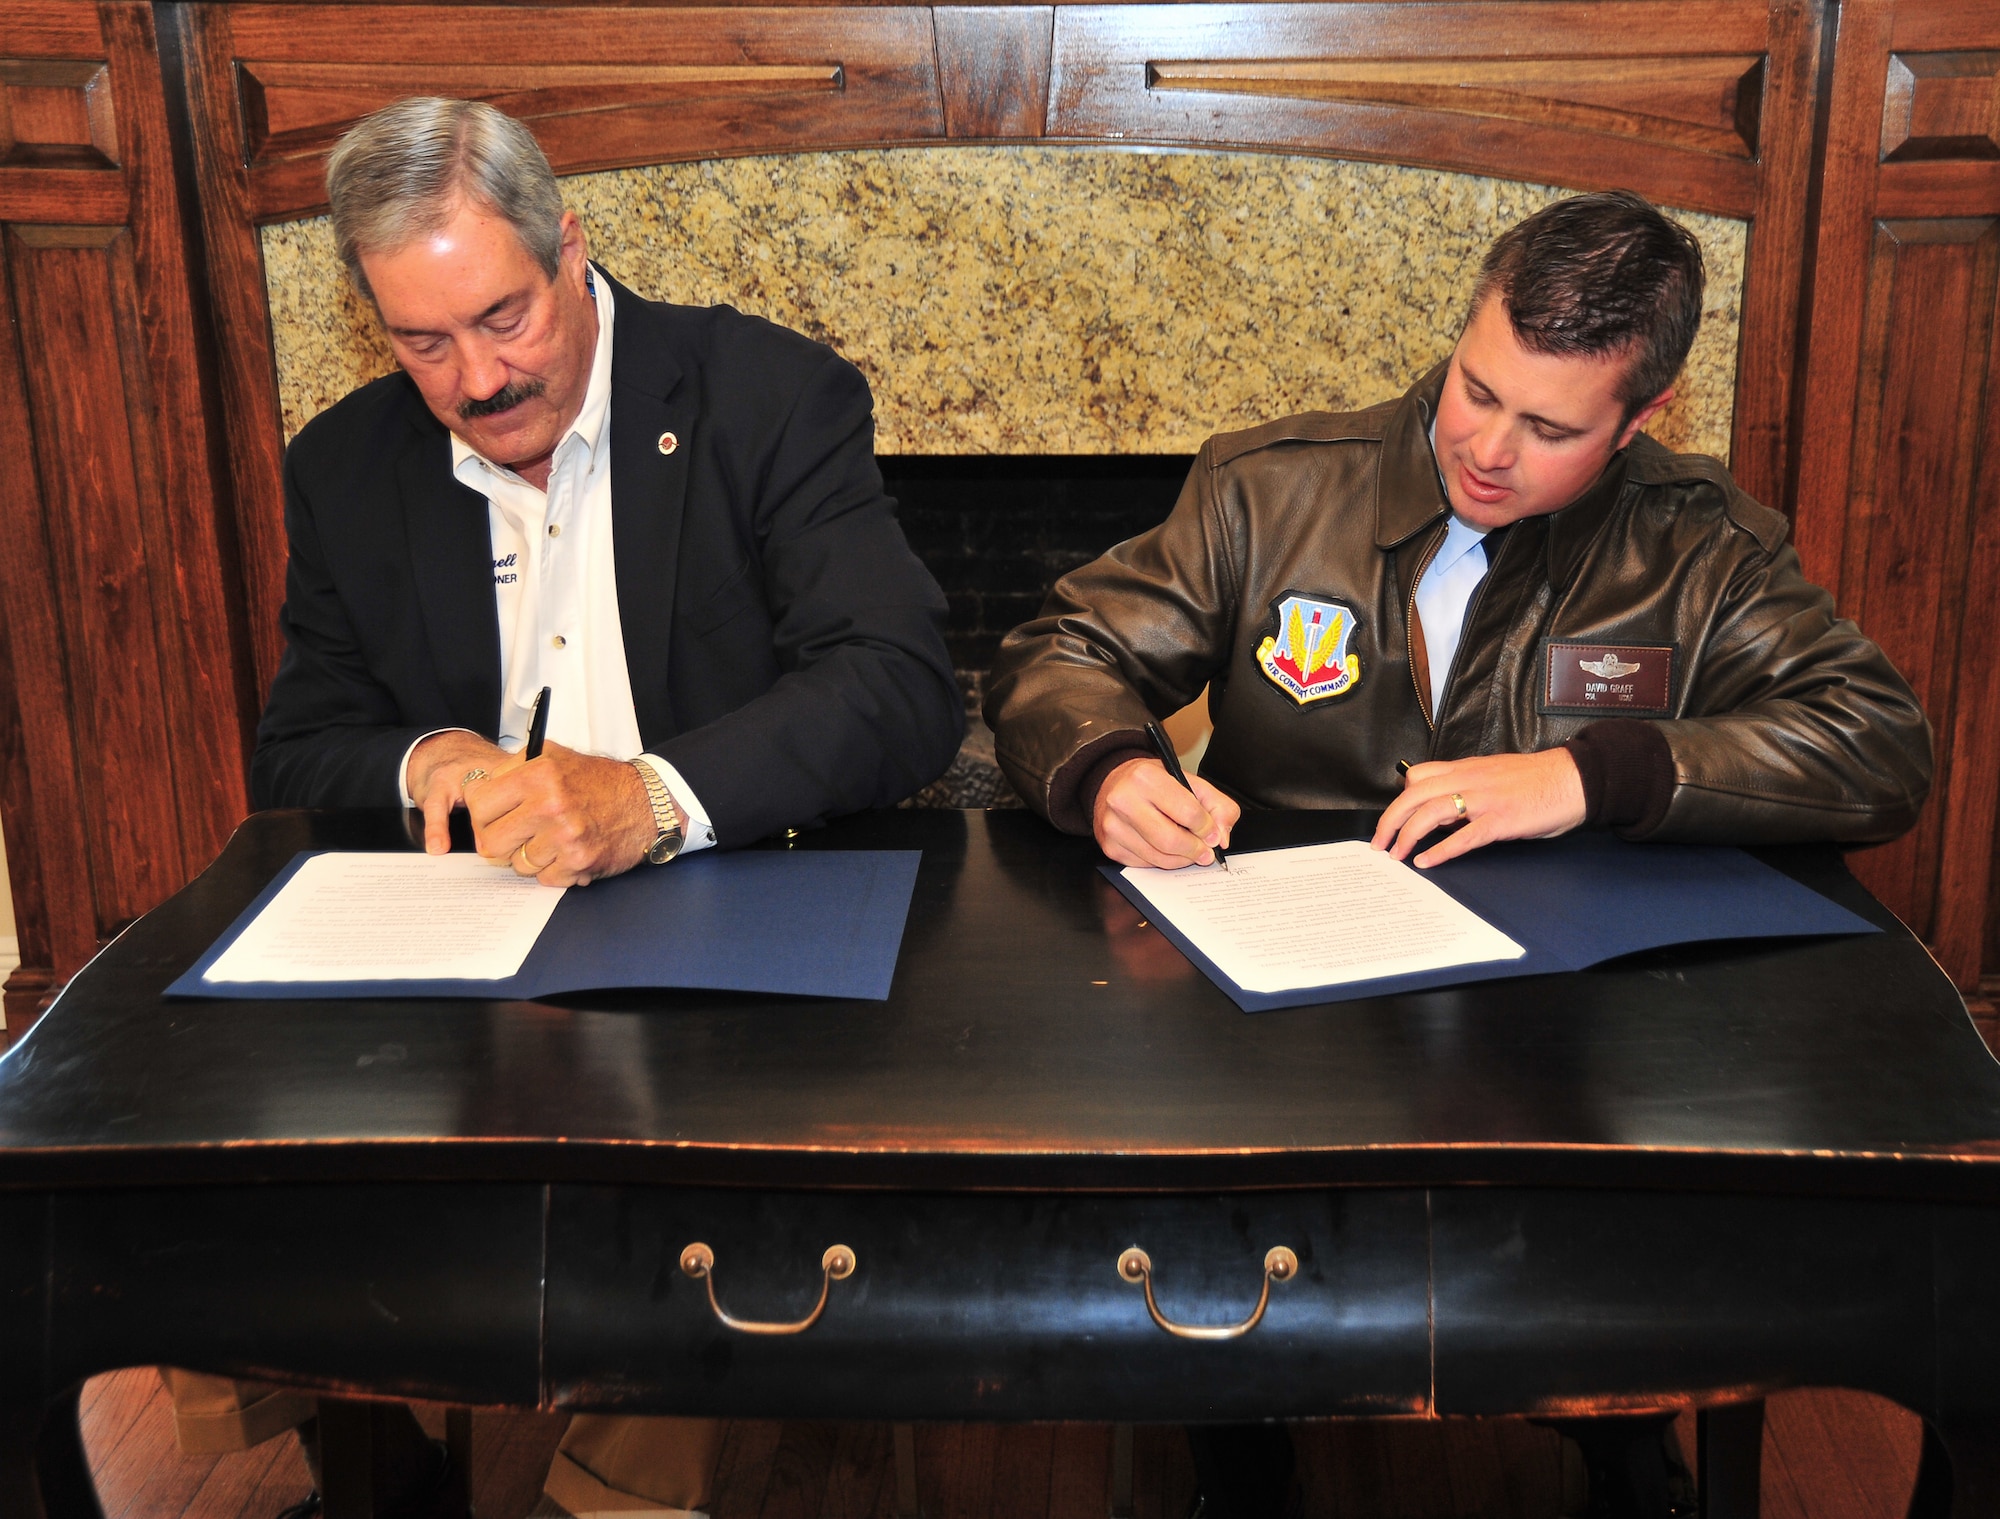 From left to right: Guy M. Tunnell, Bay County’s District 4 commissioner, and Col. David E. Graff, 325th Fighter Wing commander, sign a letter of intent May 2 as part of the P4 initiative, or Public-Public; Public-Private Partnerships. The P4 program is a way for Air Force bases and their local communities to save money by using each other's assets creatively to solve problems. (U.S. Air Force photo by Airman 1st Class Sergio A. Gamboa)